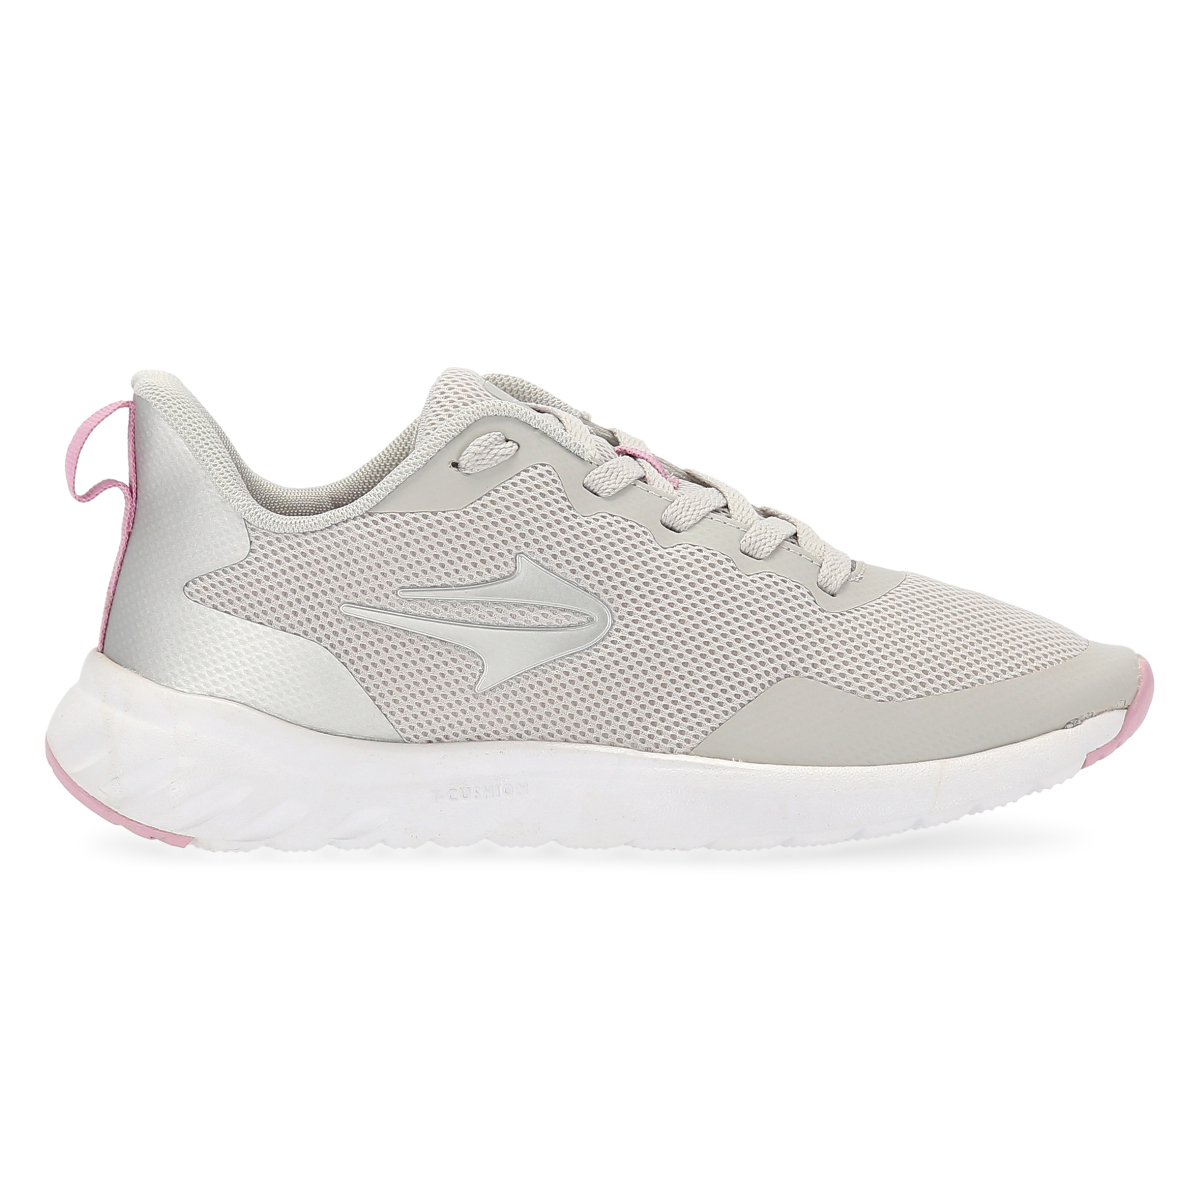 Zapatillas Entrenamiento Topper Strong Pace III Mujer,  image number null